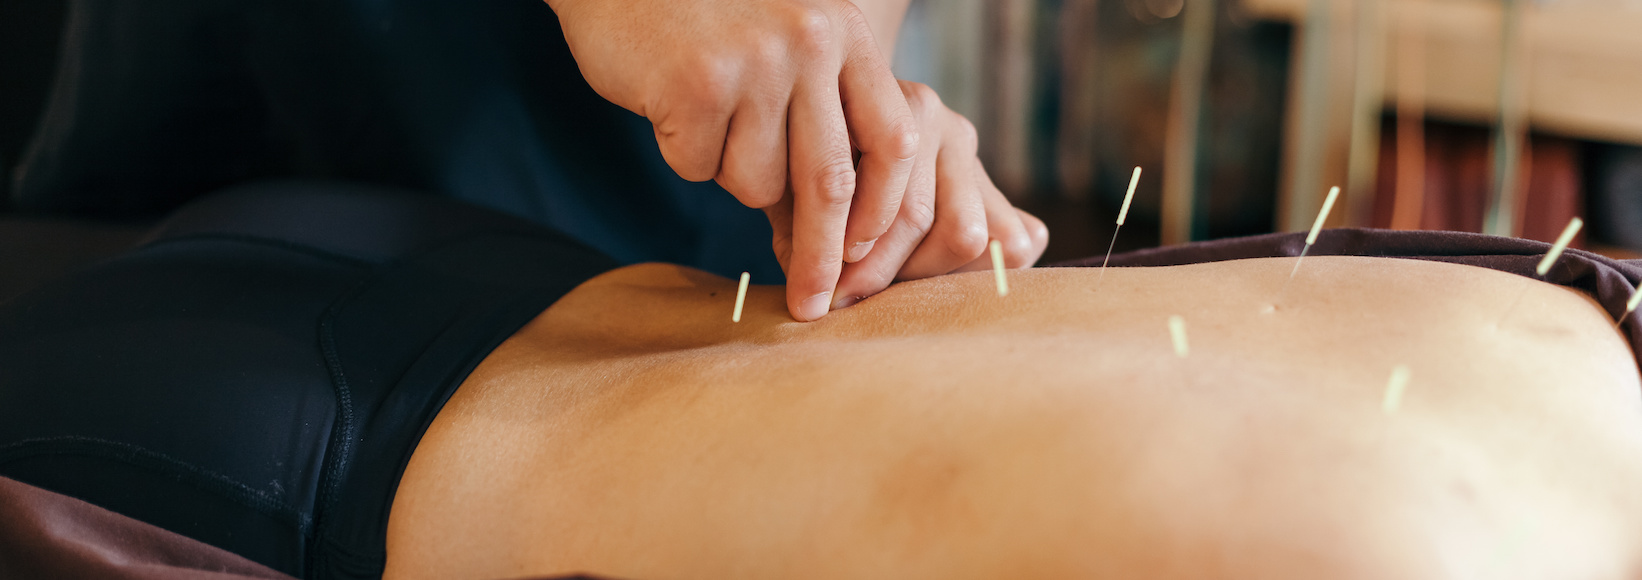 Dry-Needling-Southern-Rehab-and-Sports-Medicine